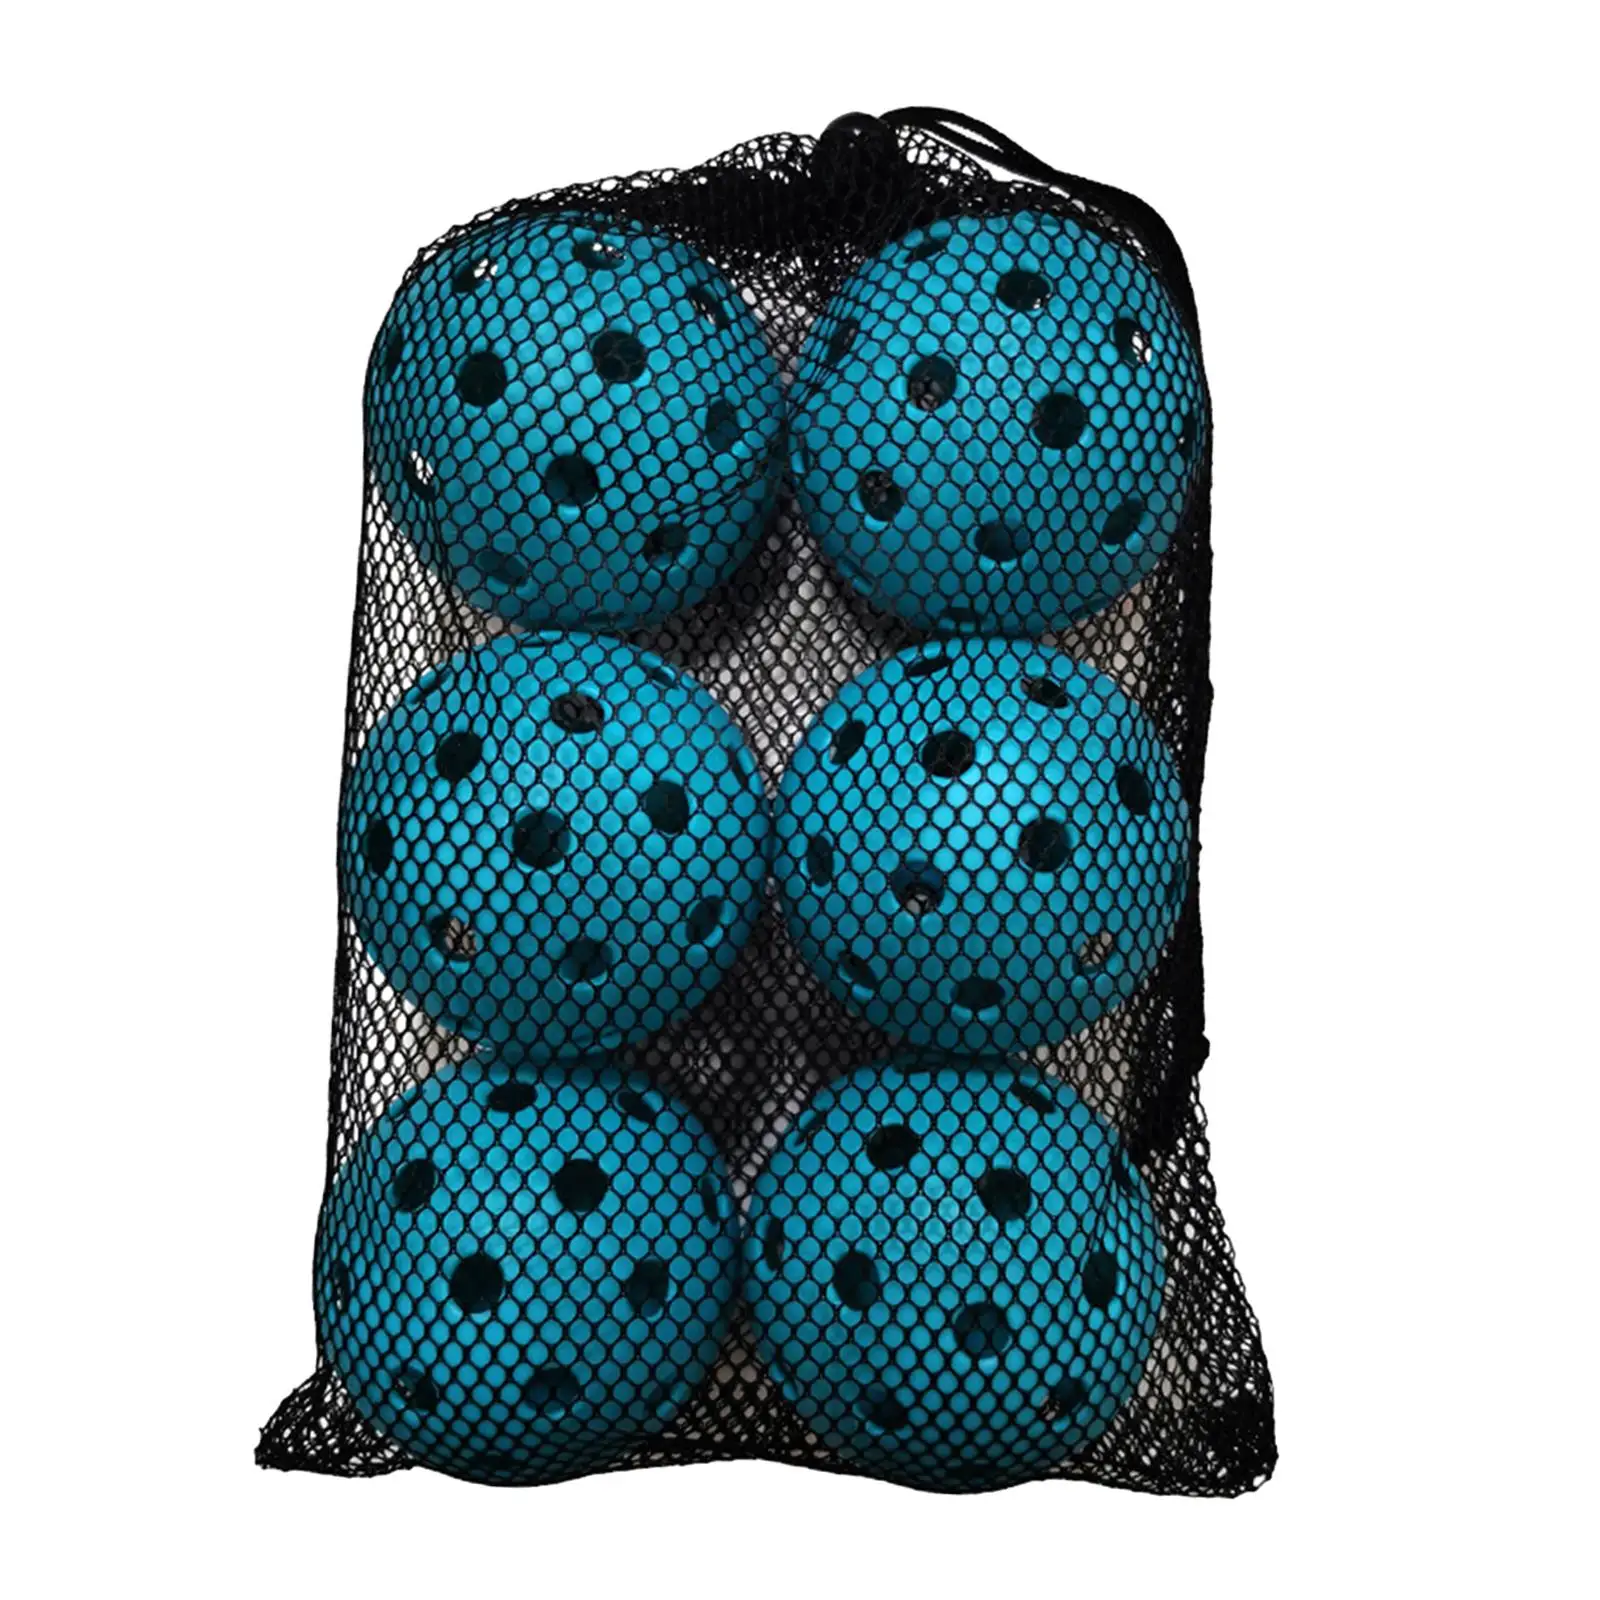 6Pack Outdoor Pickleball Balls 40 Holes Pickleball, High Elastic Durable Pickle Balls Set for All Style Paddle